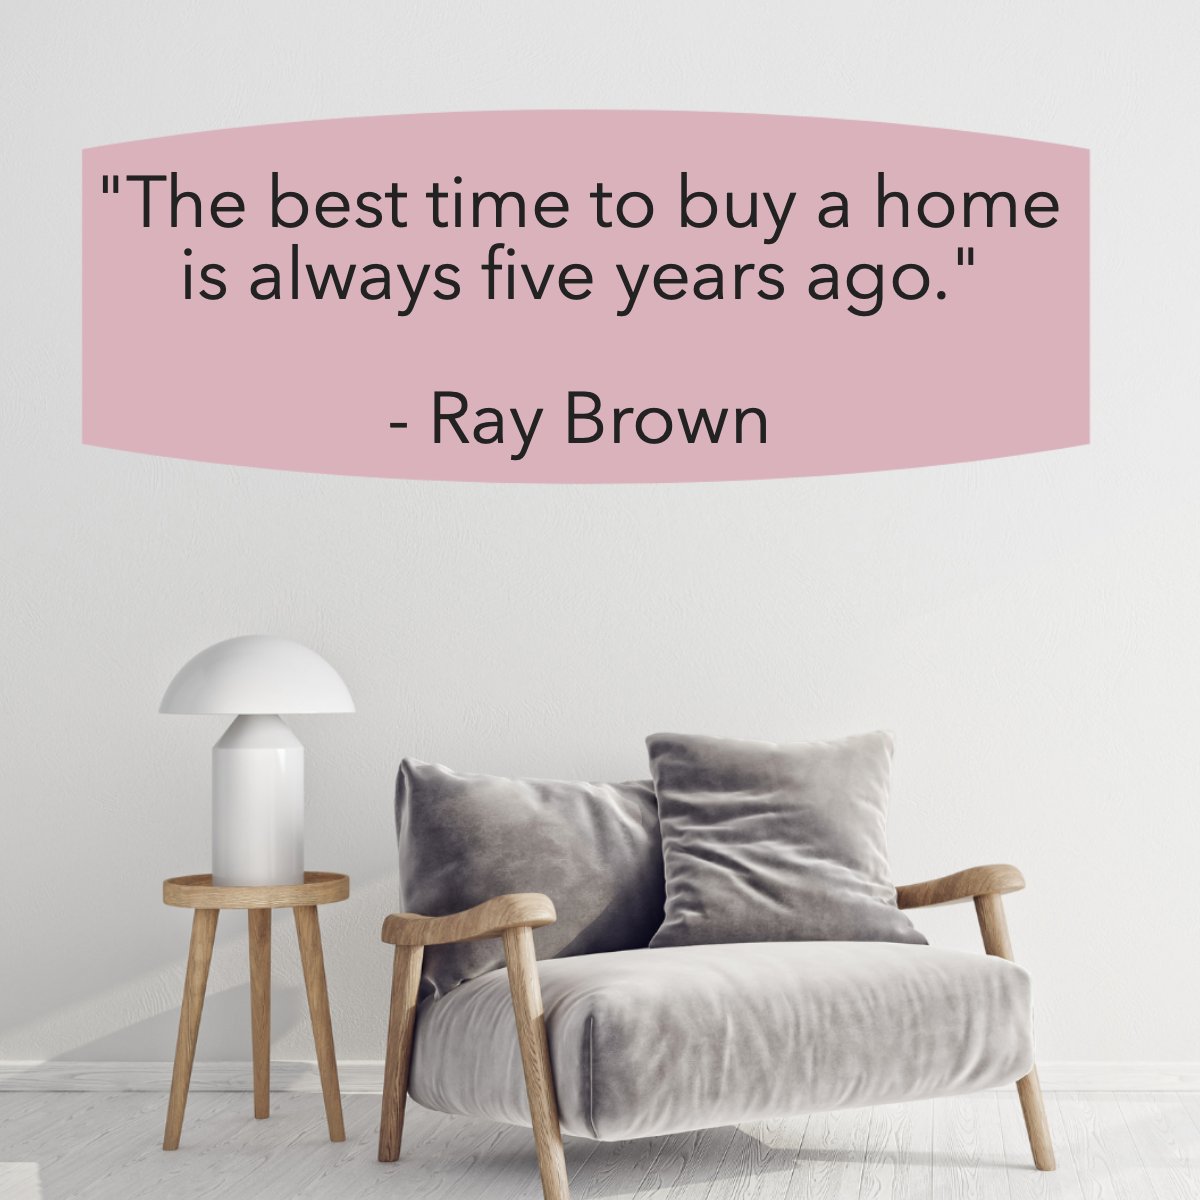 'The best time to buy a home is always five years ago'
― Ray Brown 📖

#home #homesale #hometime #besttimetobuy #quoteoftheday #quotes #raybrown
 #lasvegasrealtor #lasvegasrealestate #sparrowsells #lasvegashomes #realestate #vegasbaby #realtorlife #speaknsparrow